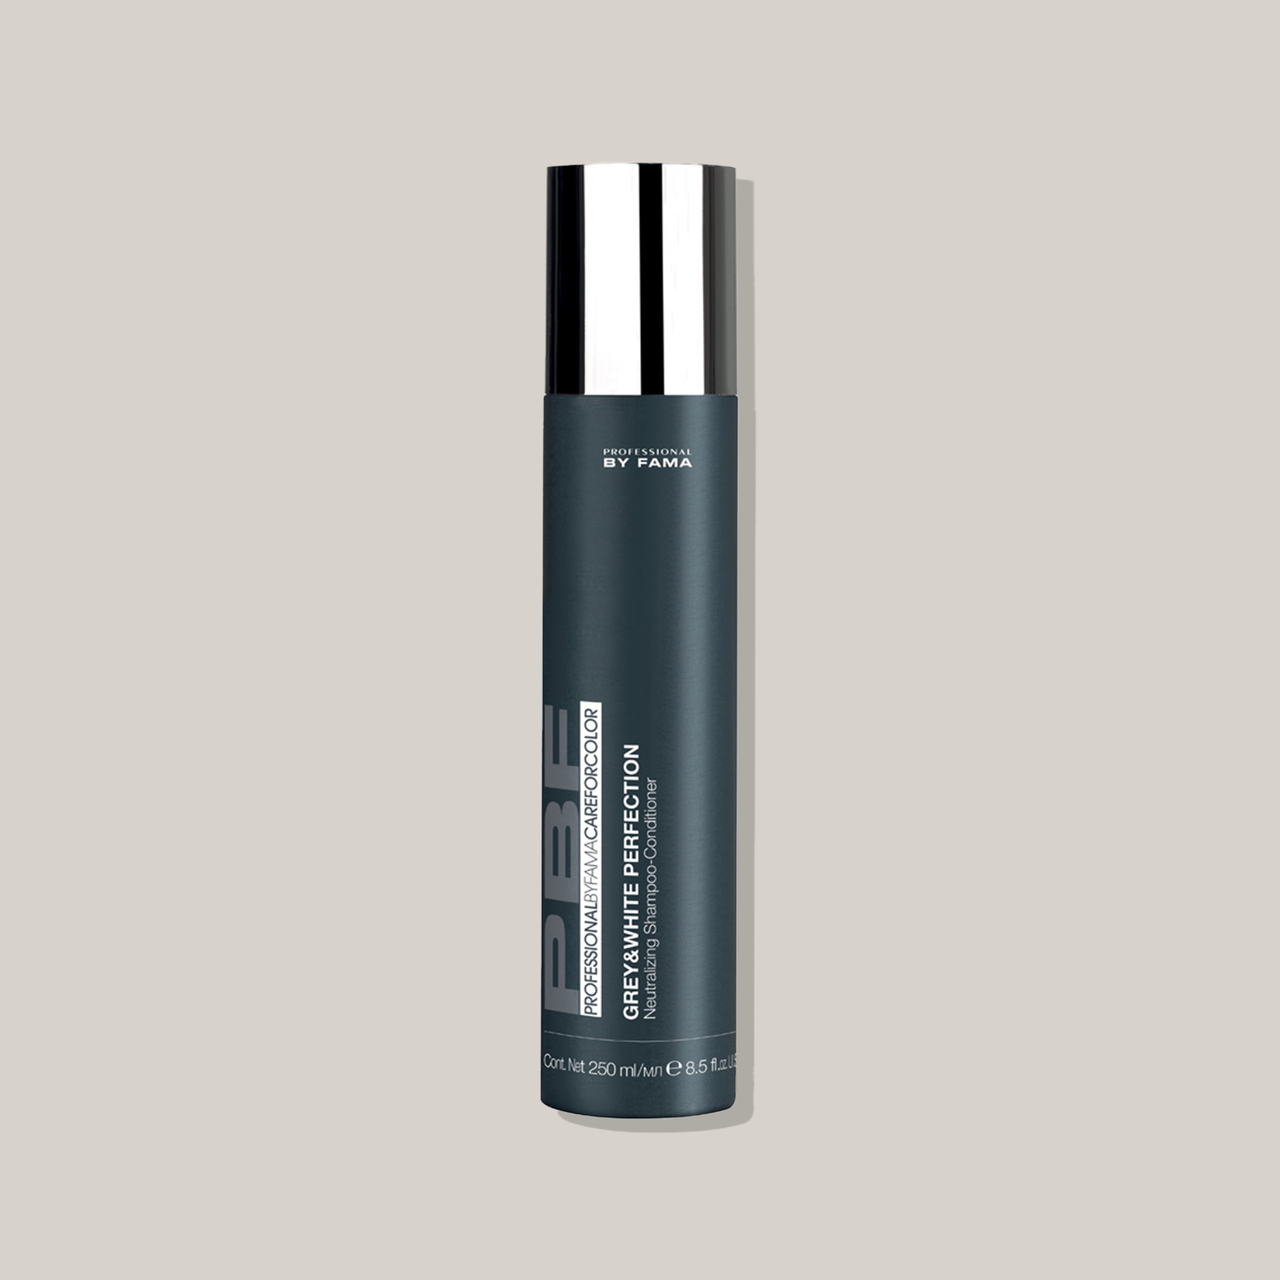 By Fama Grey & White Perfection neutralizing shampoo conditioner 